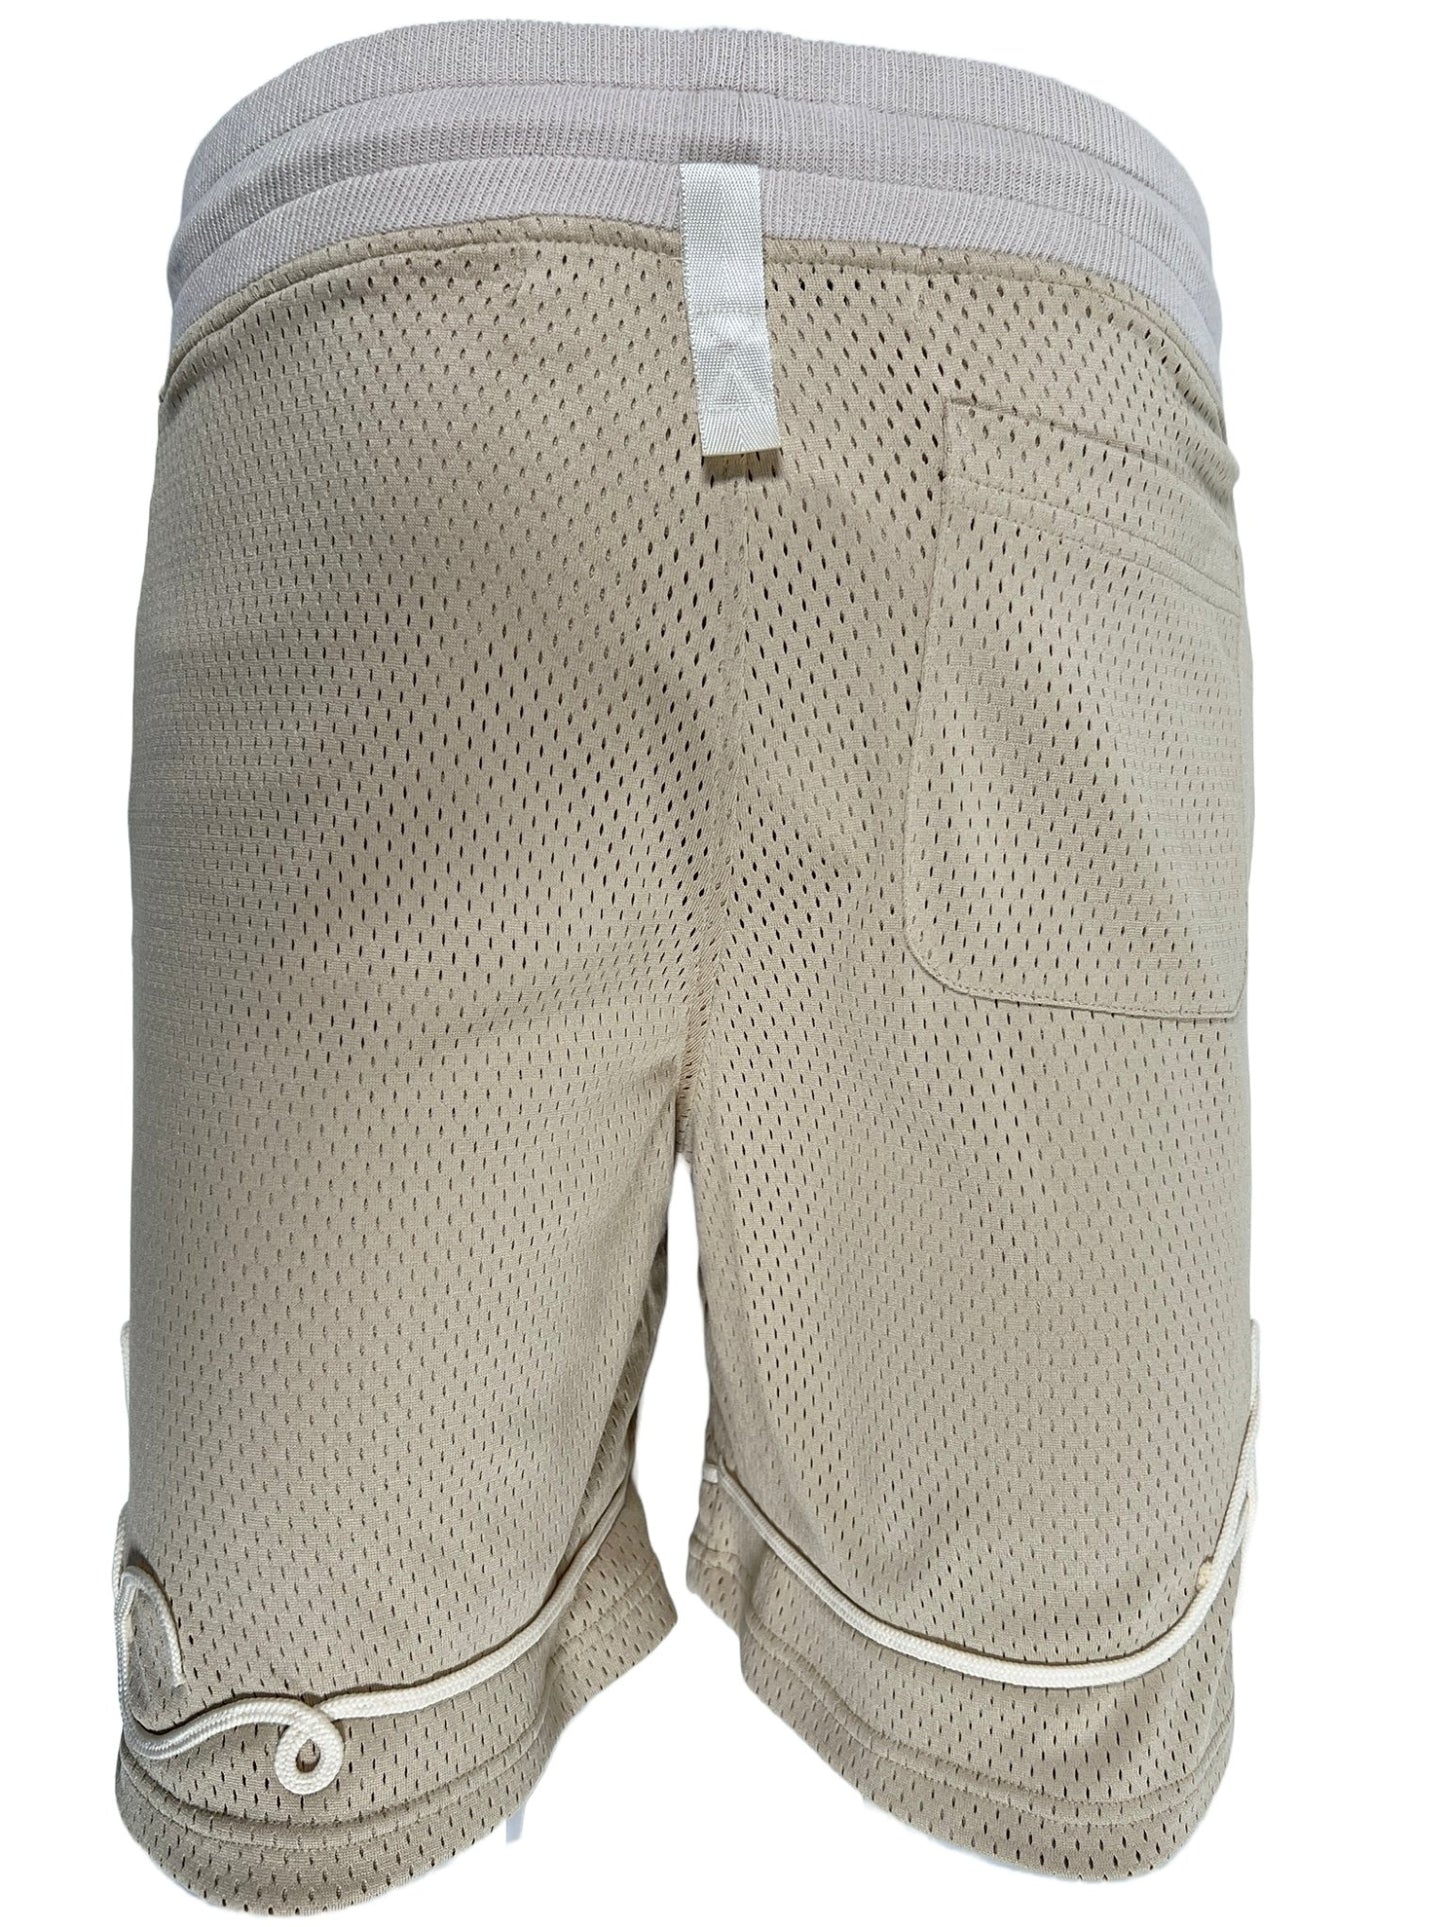 A pair of ADVISORY BOARD CRYSTALS Feldspar Ecru cotton basketball shorts with white zippers.